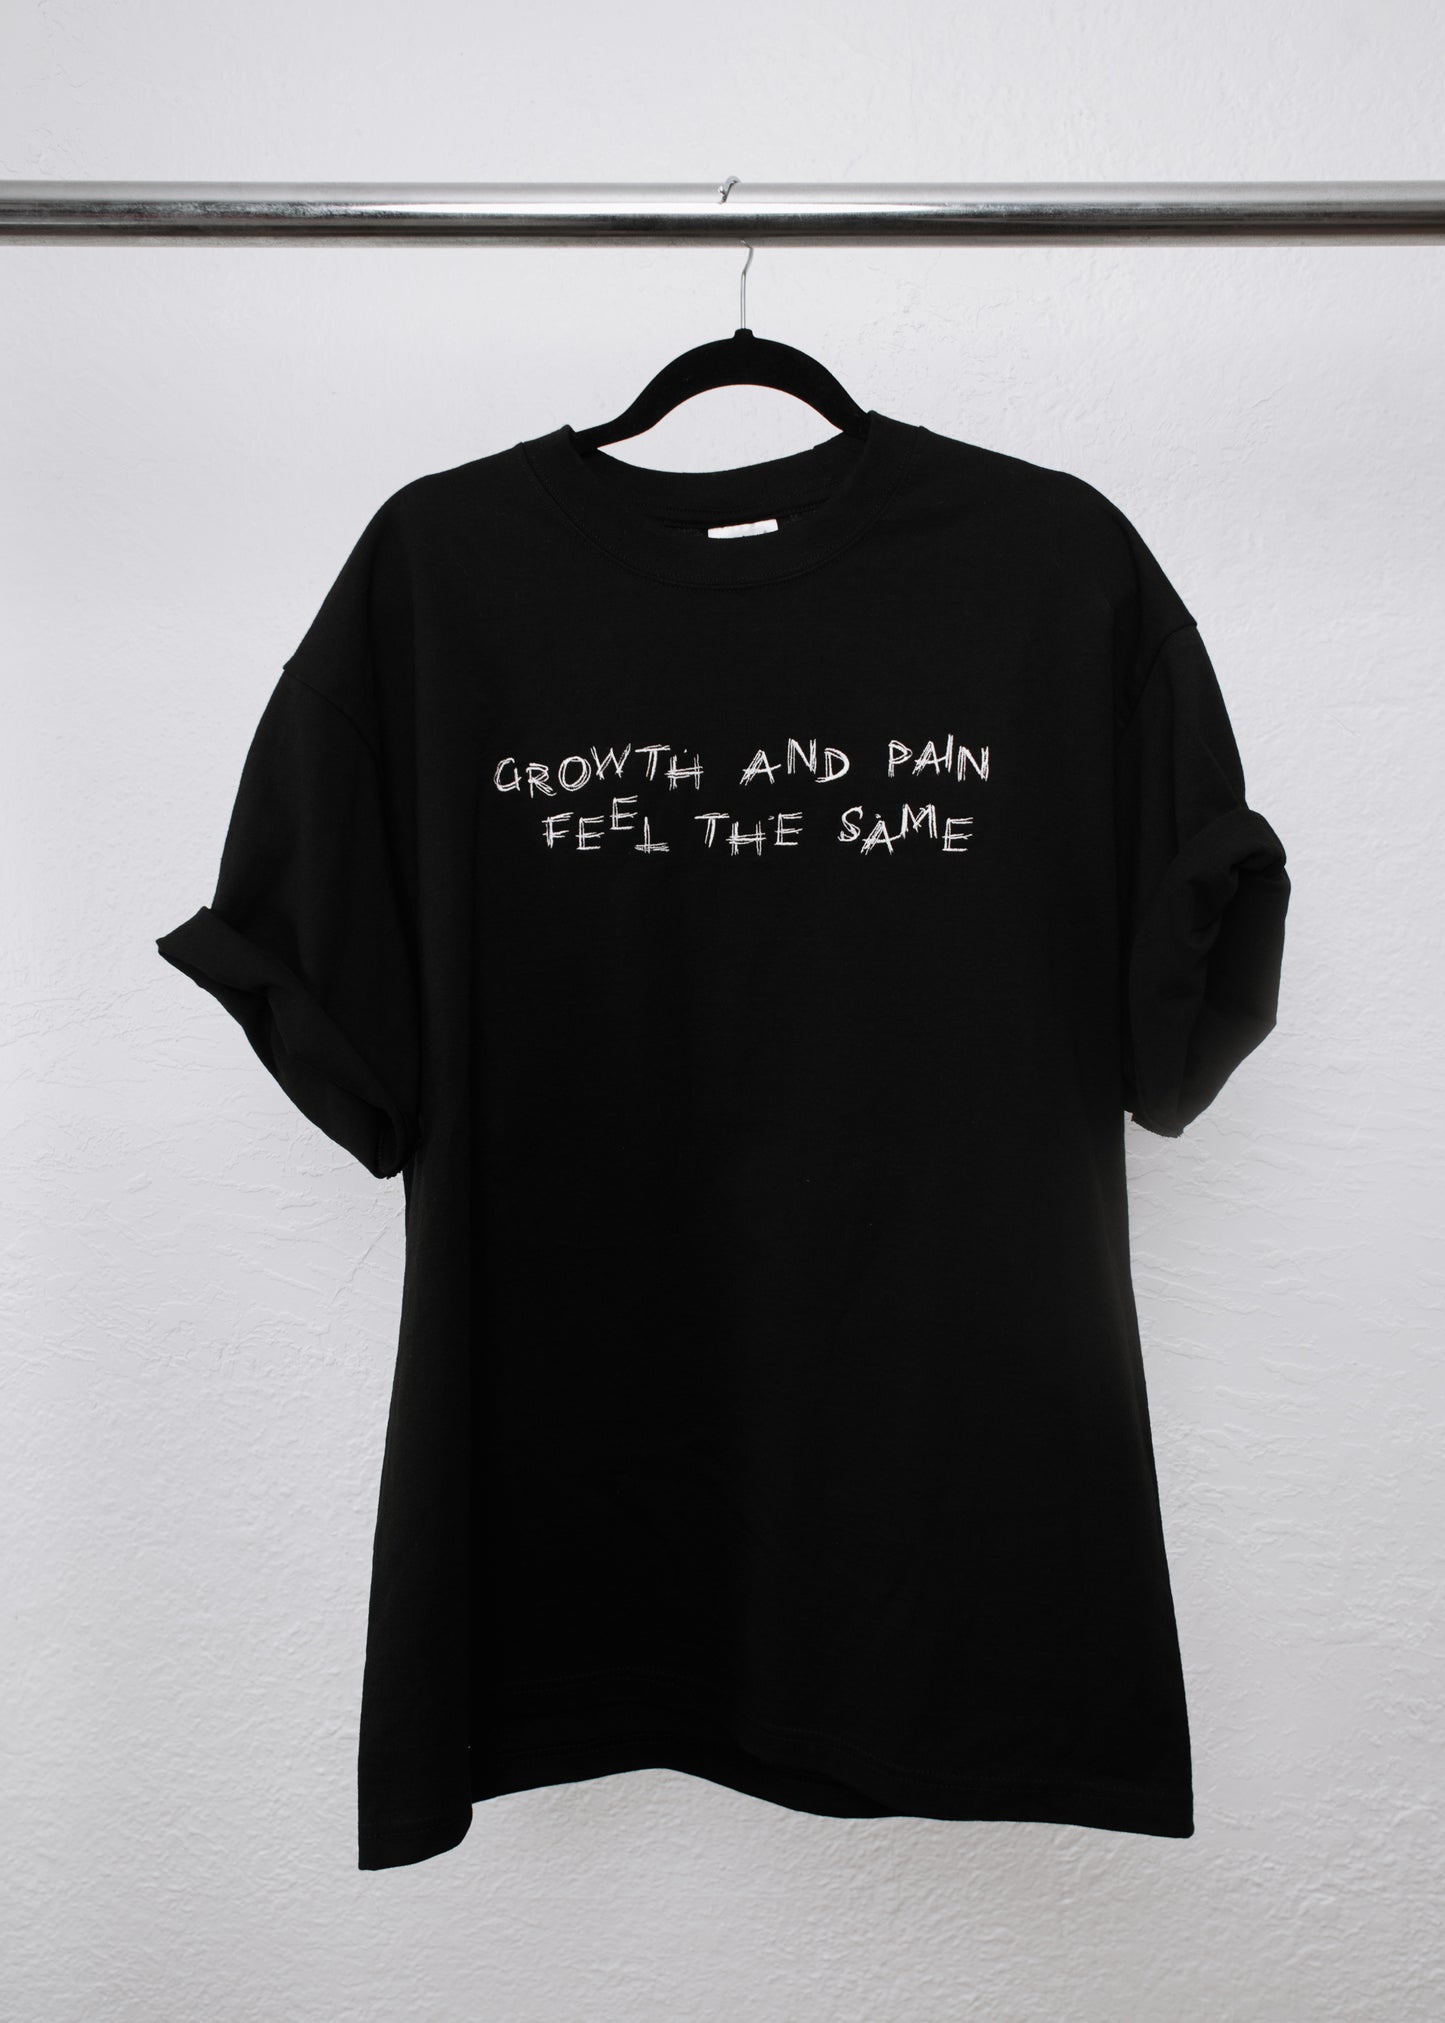 "Growth And Pain" T-Shirt - Summer 2023 Limited Edition